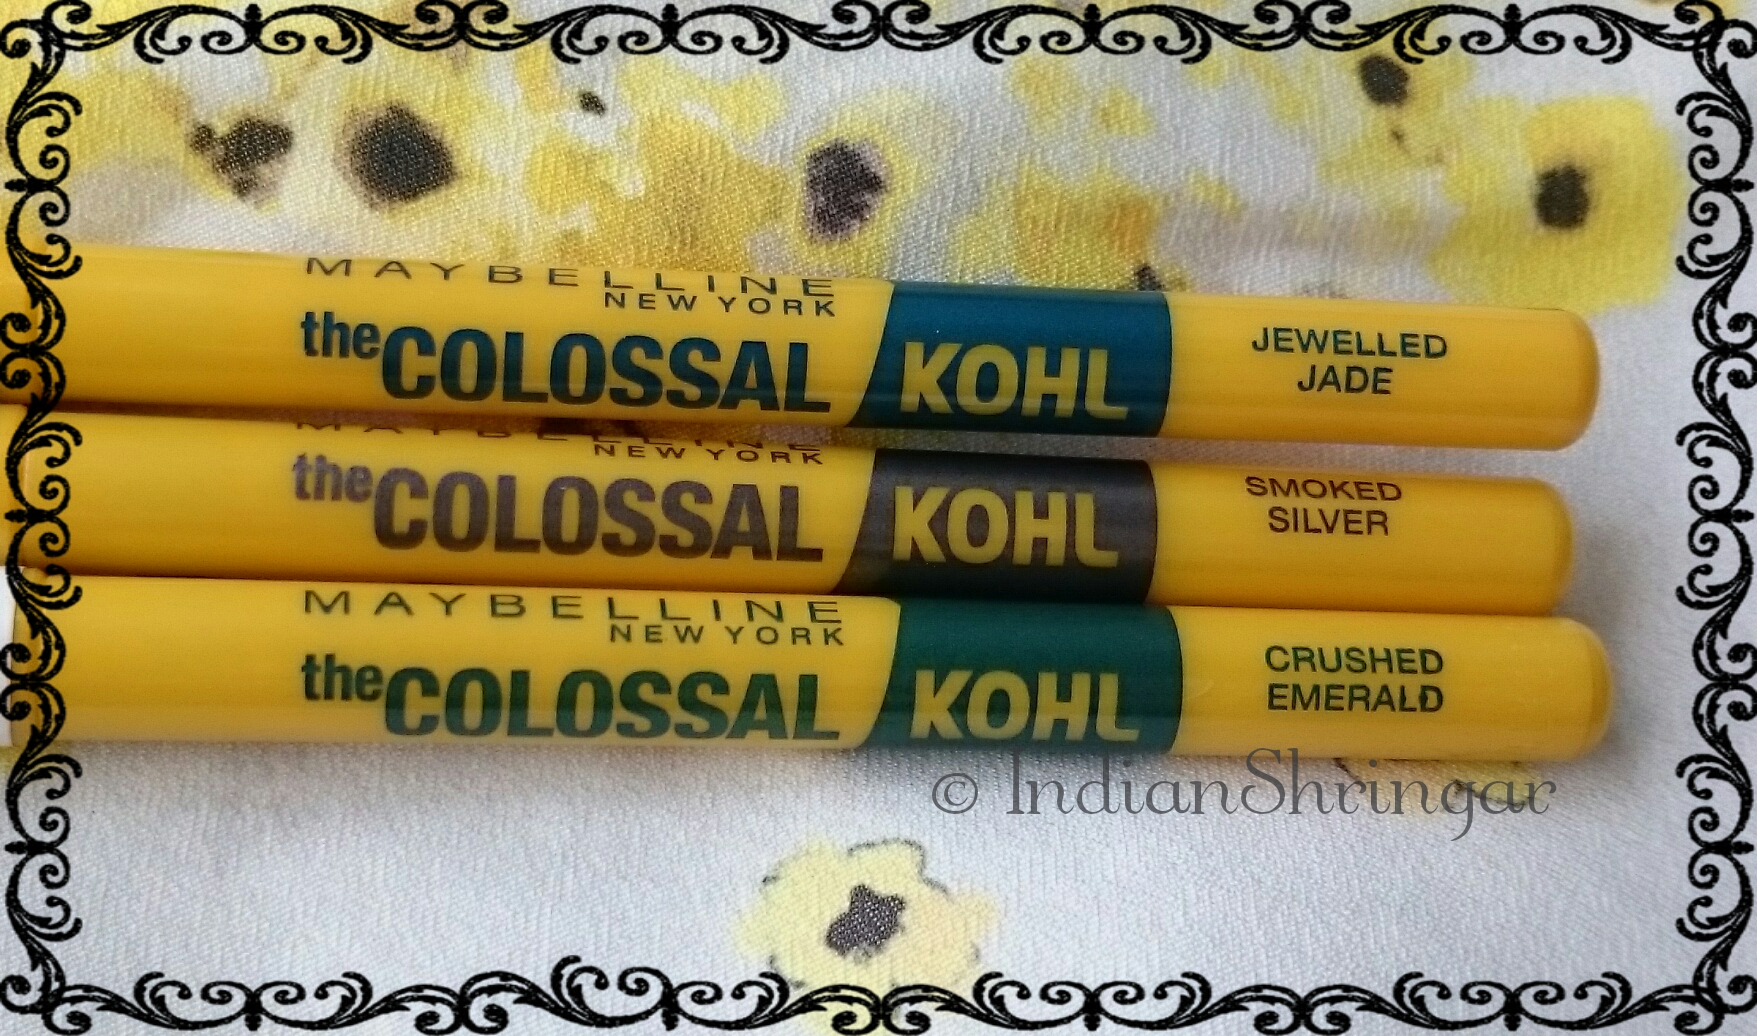 Maybelline Colossal Kohl in Jewelled Jade, Smoked Silver and Crushed Emerald - Review and swatches.